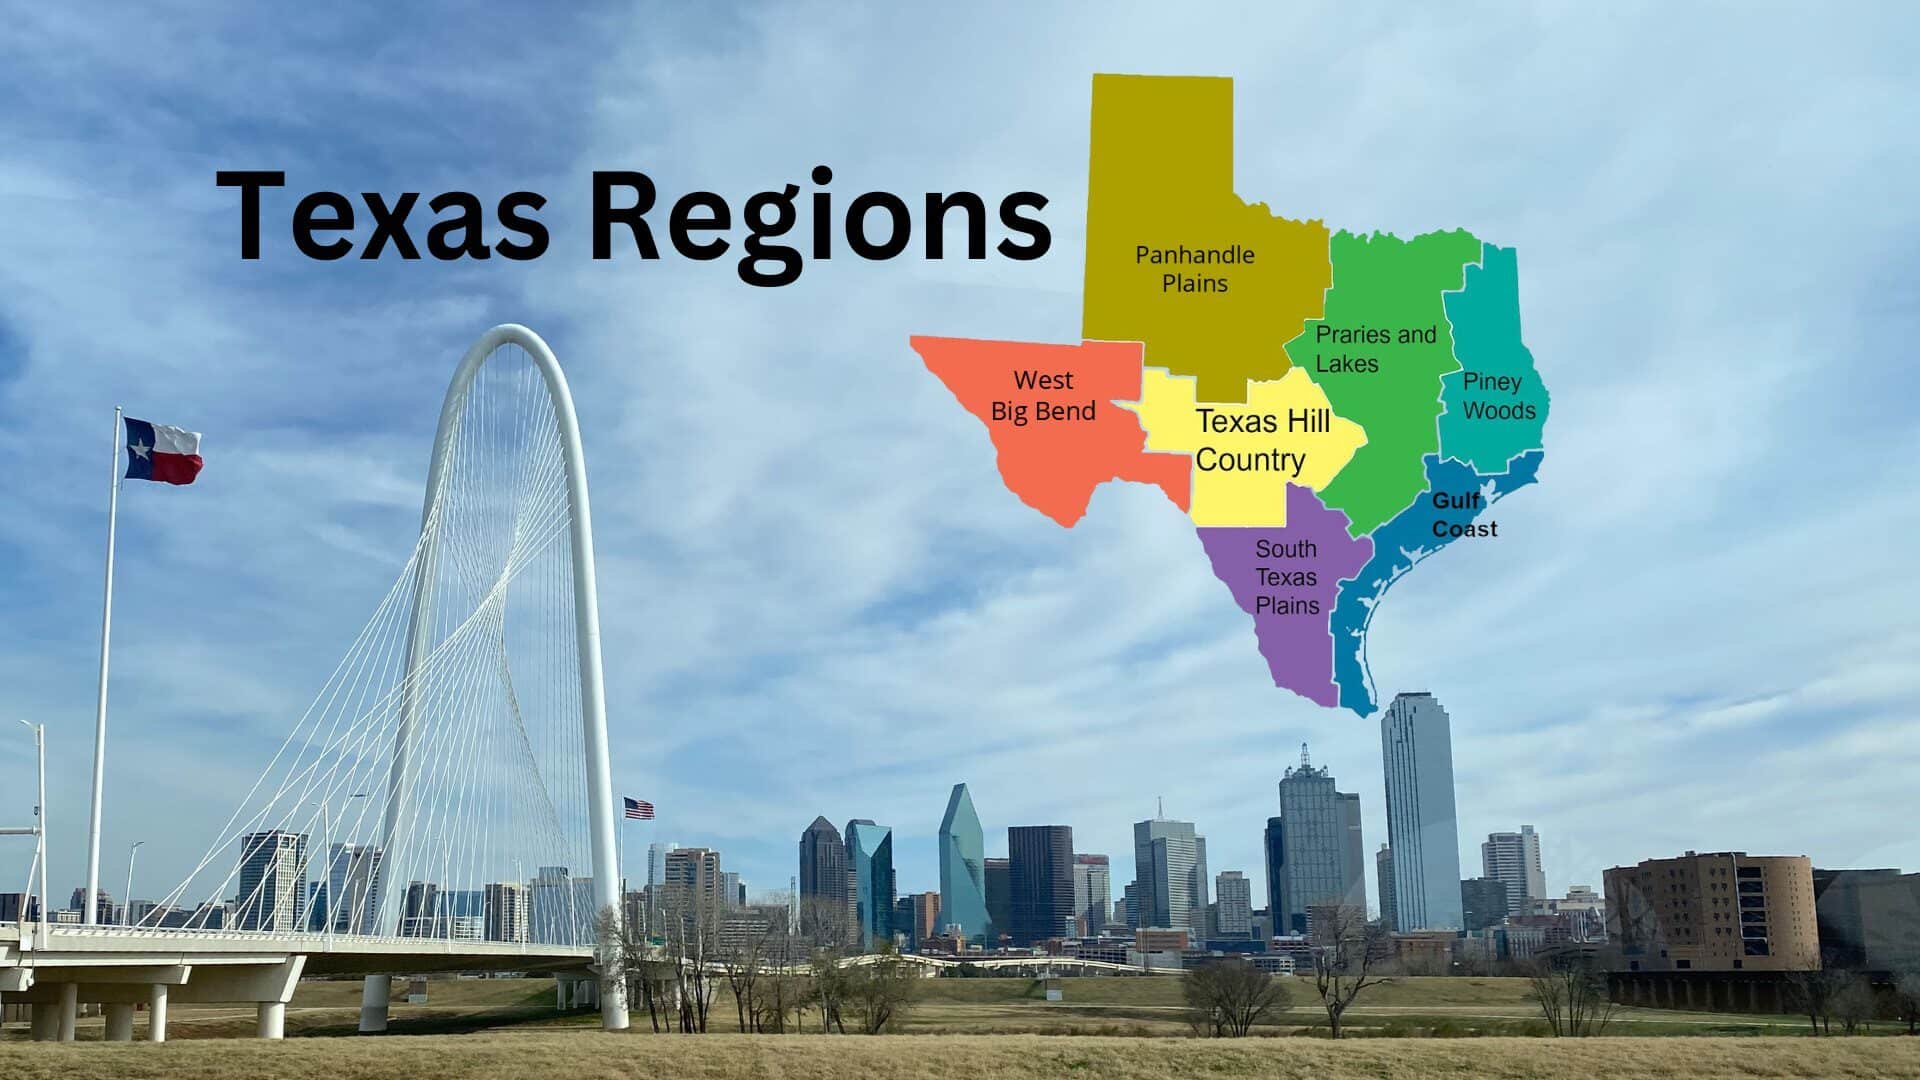 View of a downtown Texas city with the words Texas Regions in black and a regional map of Texas showing all of the different regions